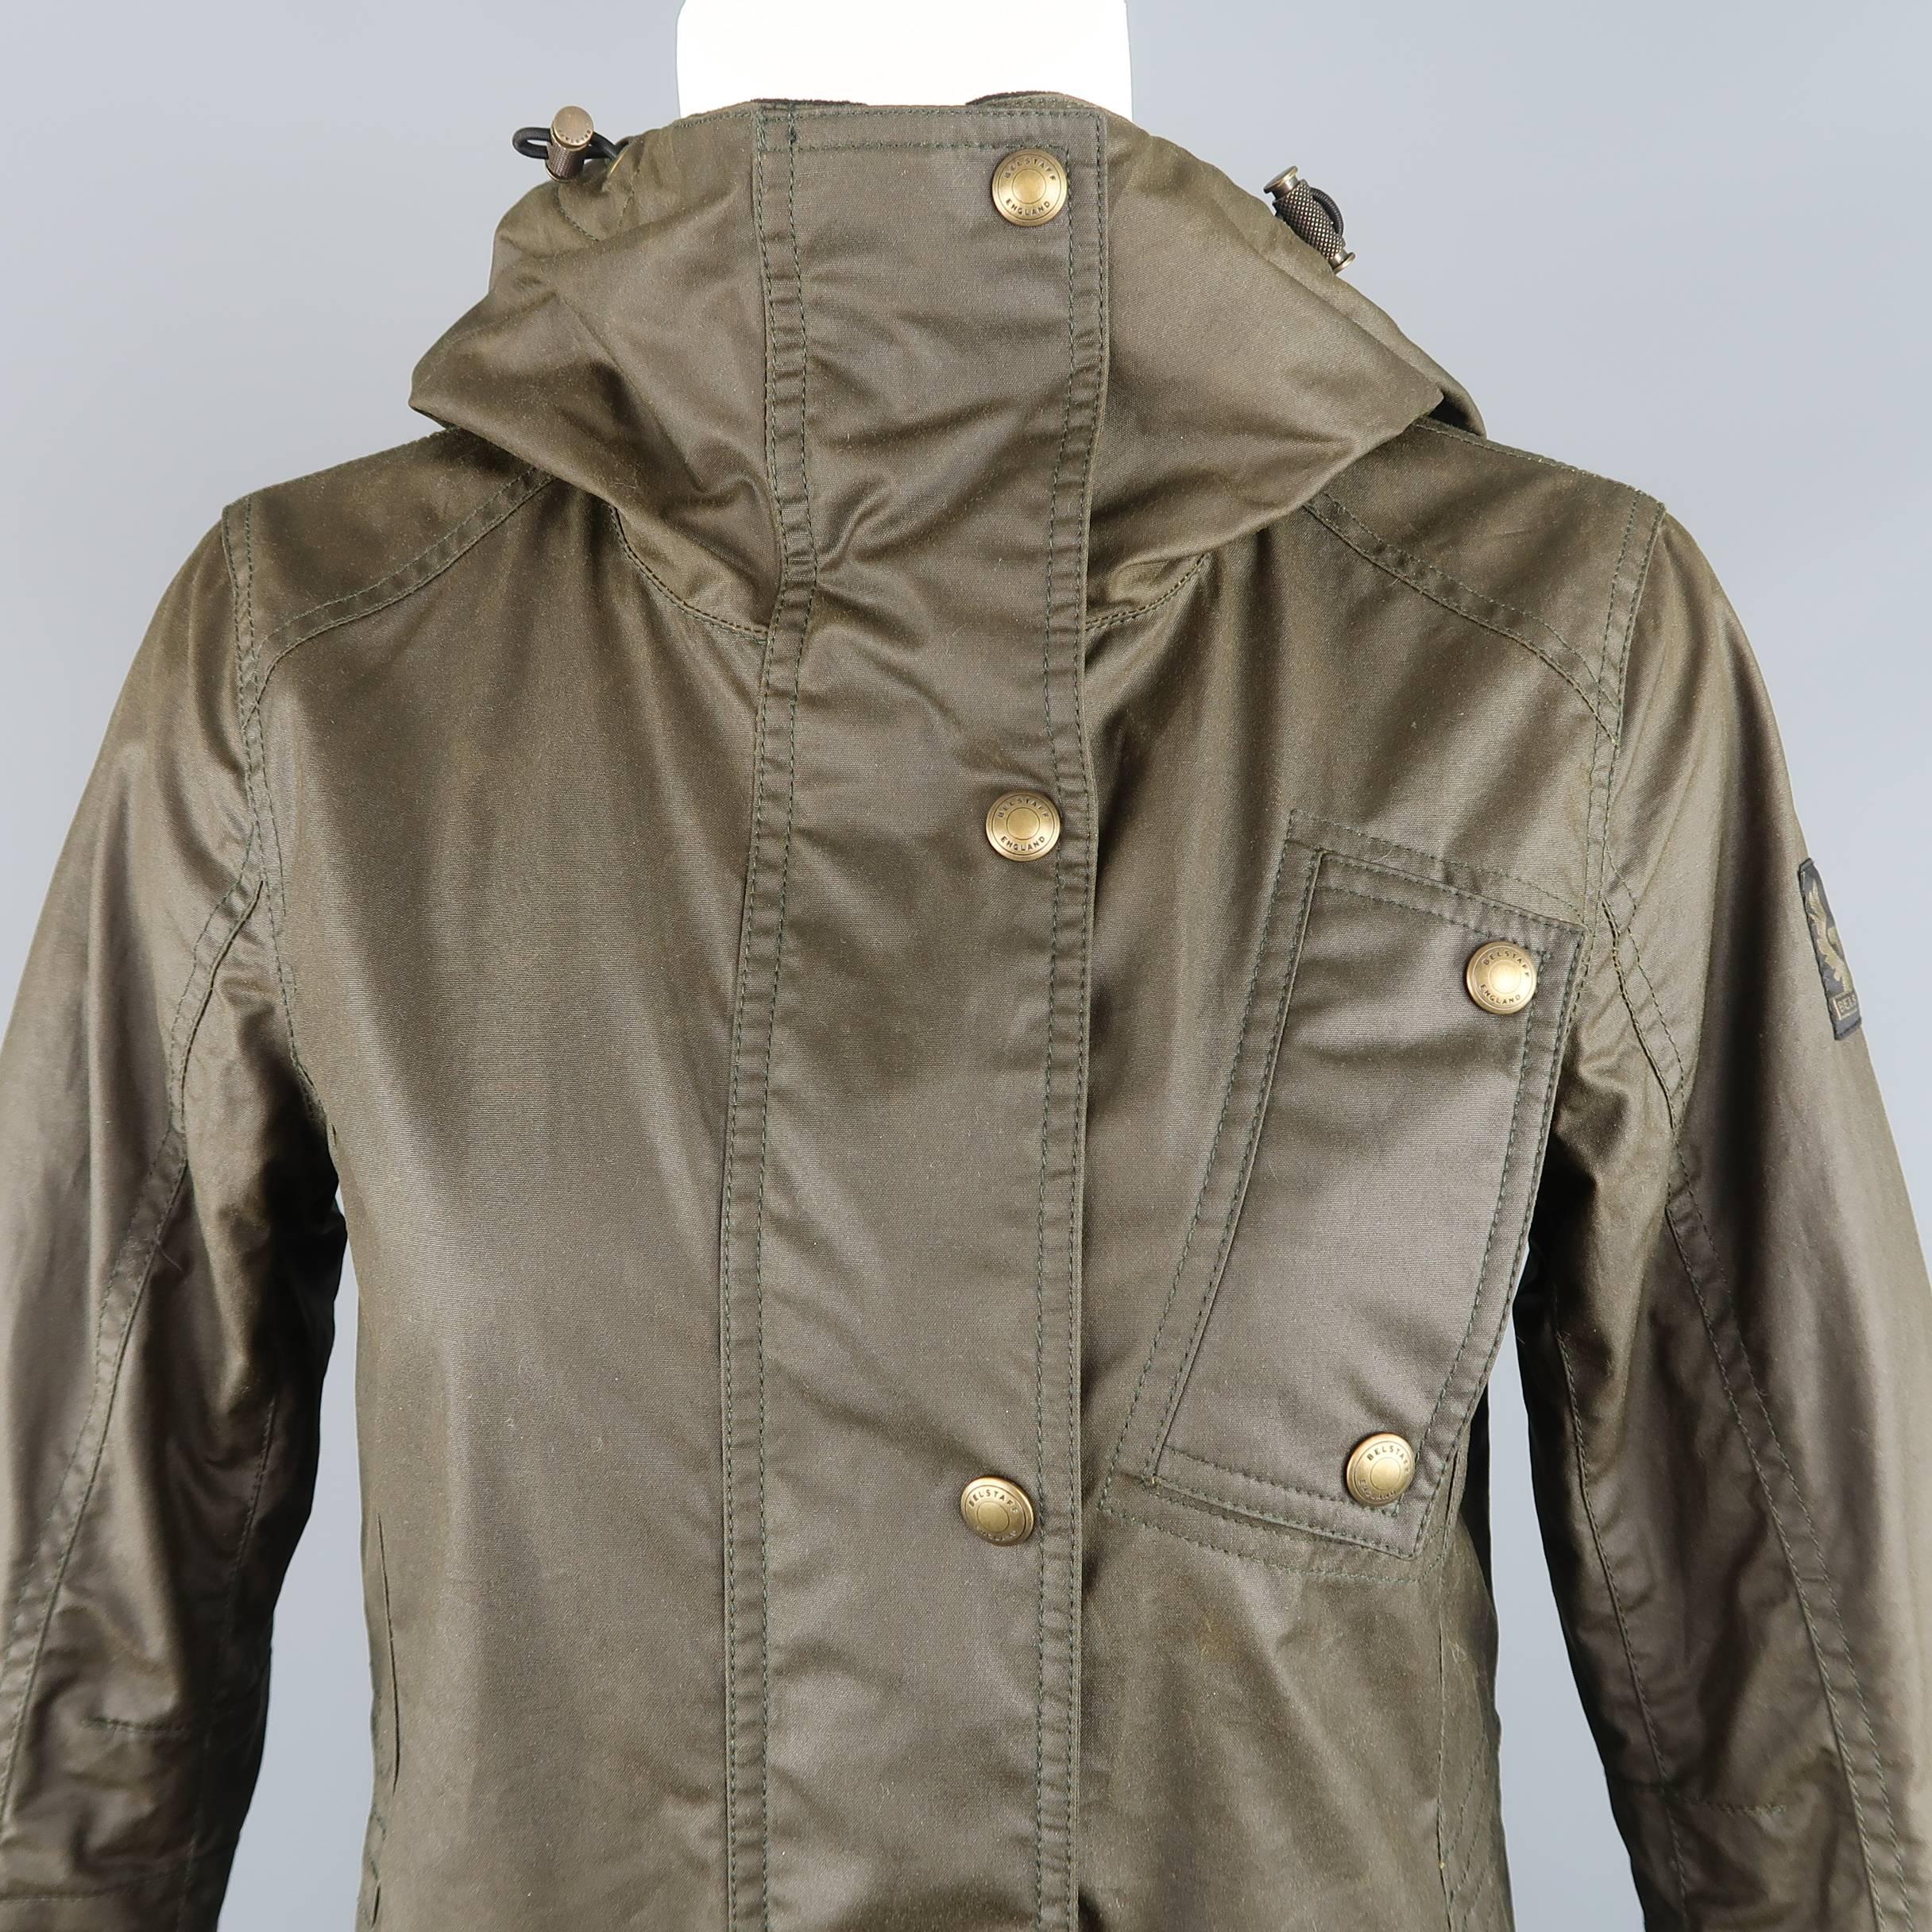 Belstaff parka comes in olive green coated cotton with snap placket zip closure, snap flap pockets, flannel liner, and drawstring hood. With tags. Fading throughout. As-is.
 
Good Pre-Owned Condition.
Marked: IT 38
 
Measurements:
 
Shoulder: 14